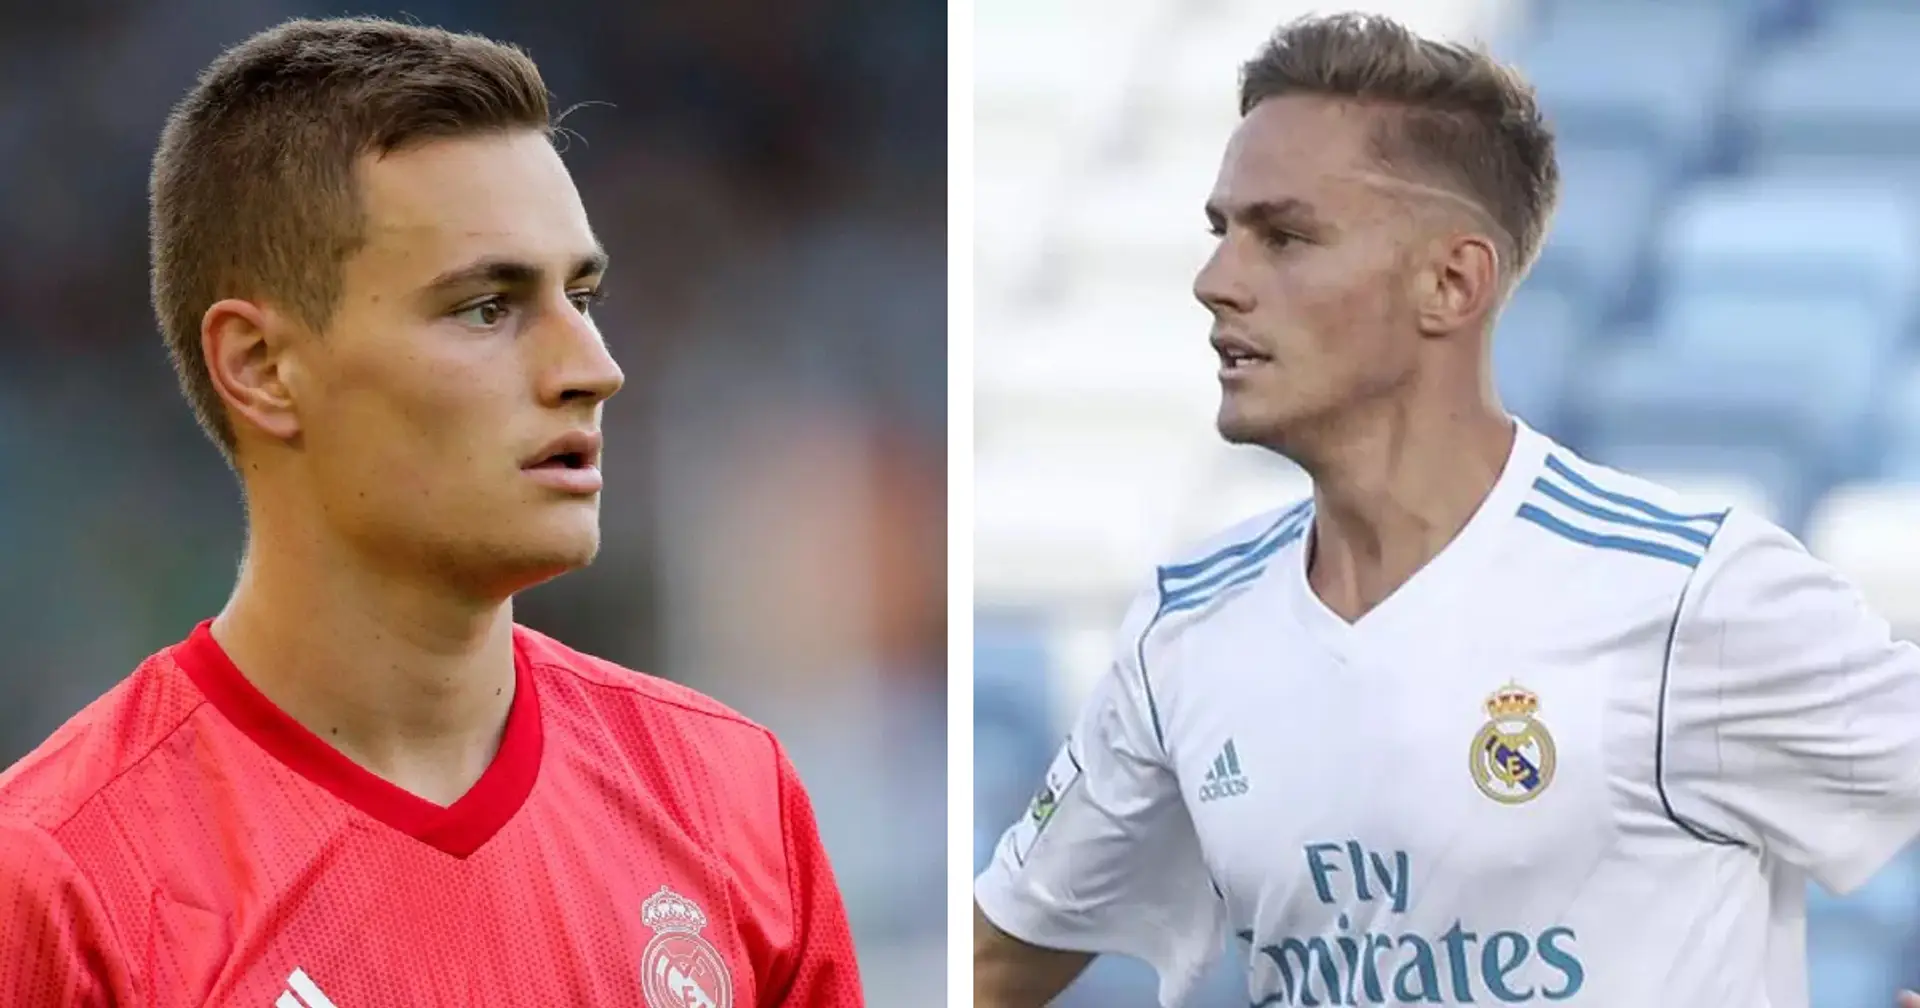 Double whammy: Levante reportedly close to signing 2 Real Madrid starlets